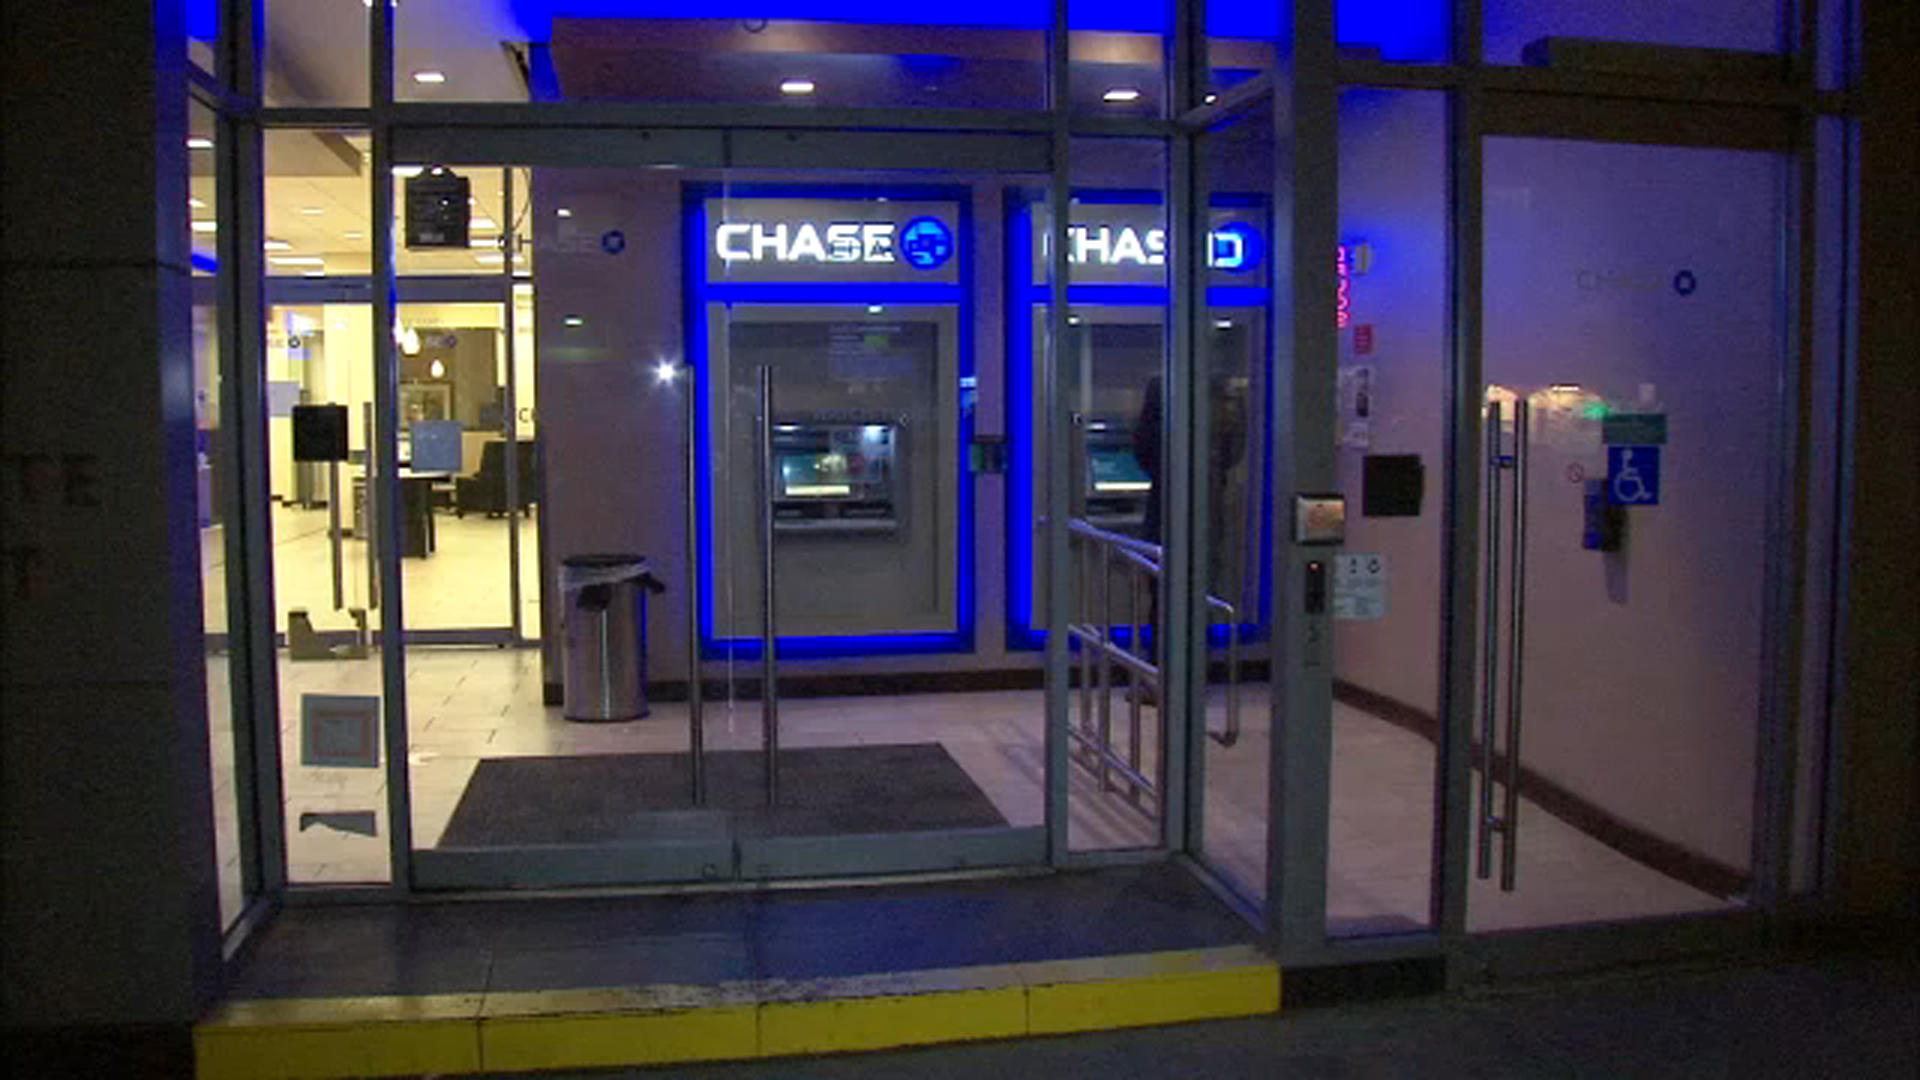 Bank of America in Jersey City with Walk-Up ATM